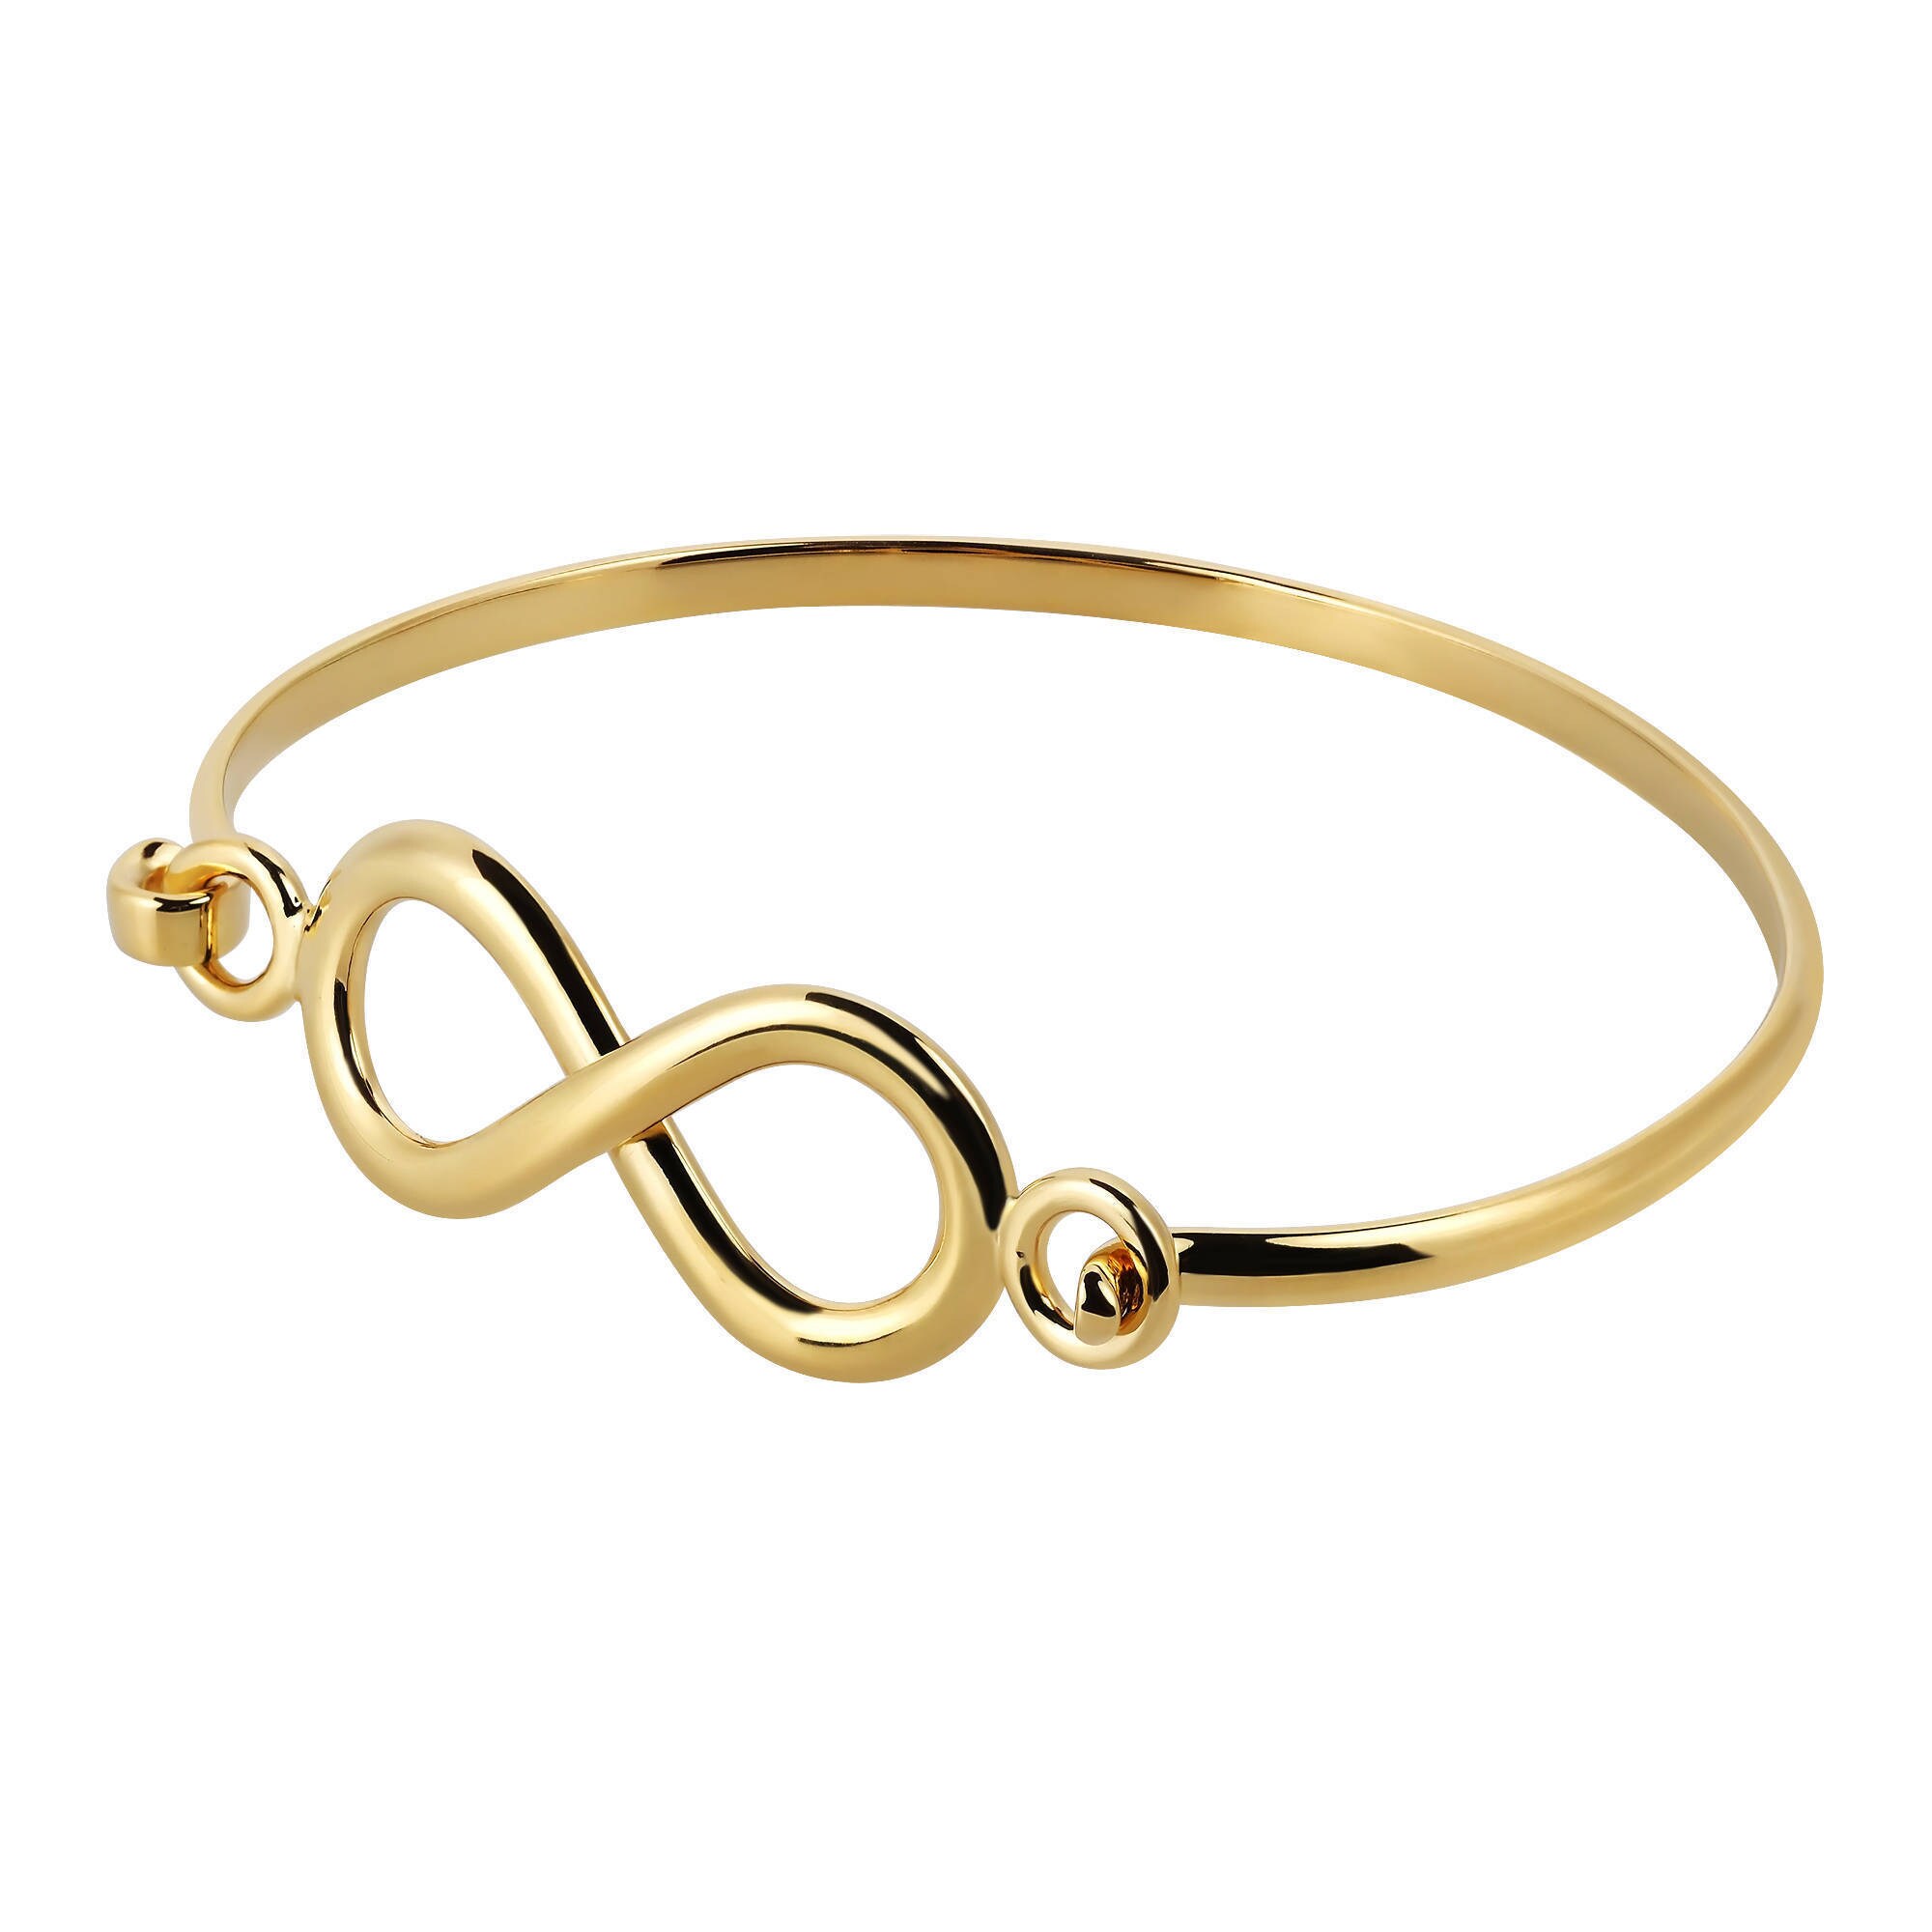 Details about  / Eternal Love Infinity 14K Yellow Gold Over Sterling Silver Bangle Bracelet